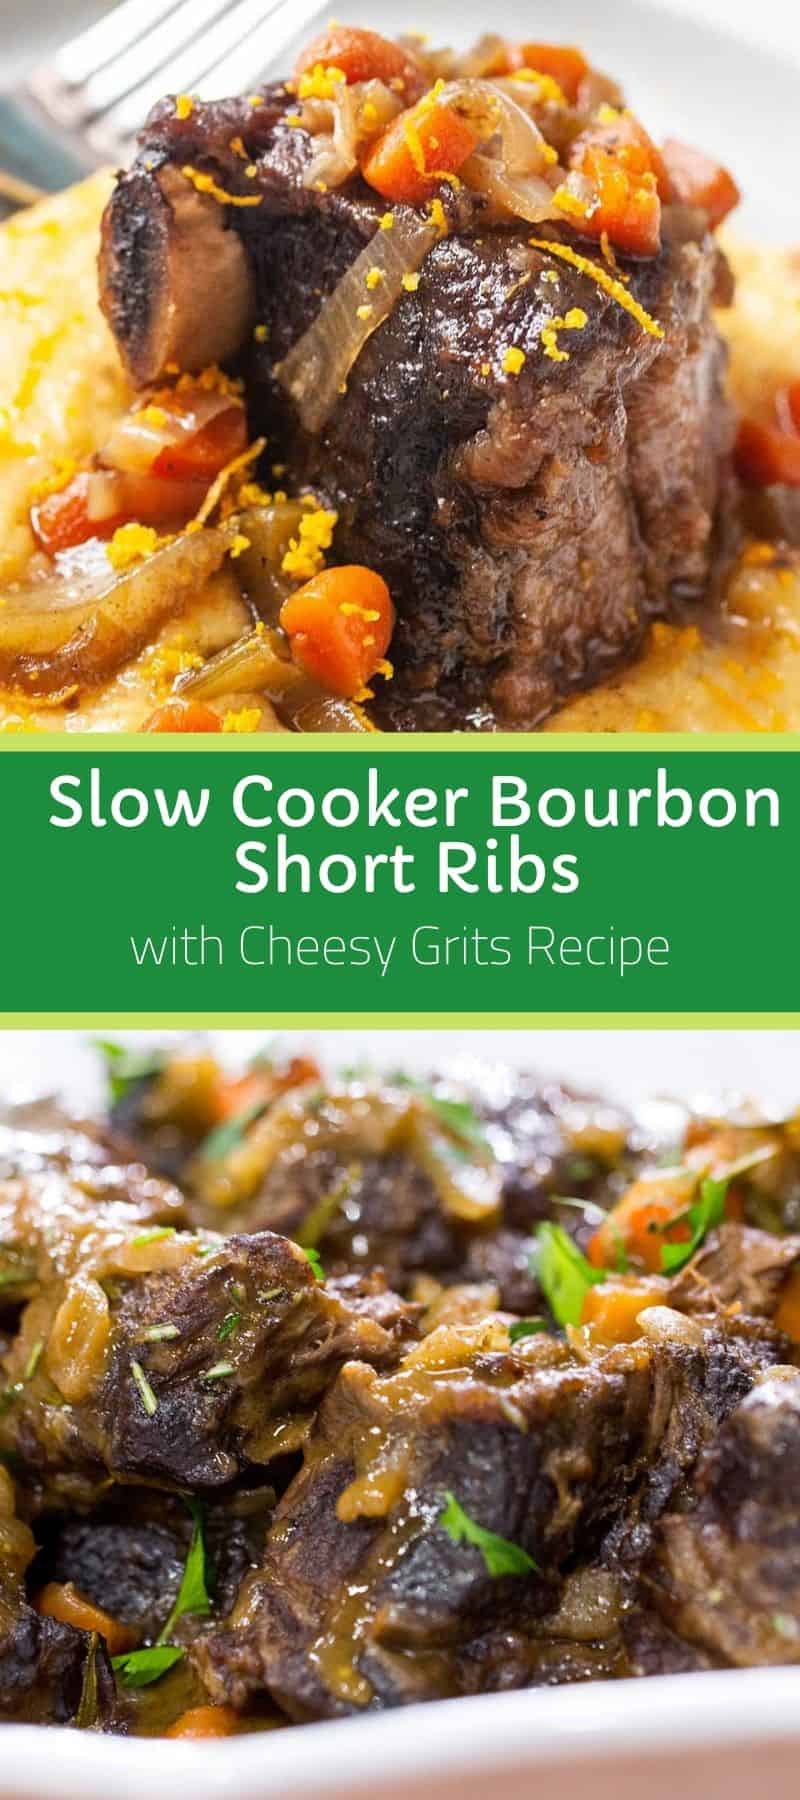 Slow Cooker Bourbon Short Ribs with Cheesy Grits Recipe 3